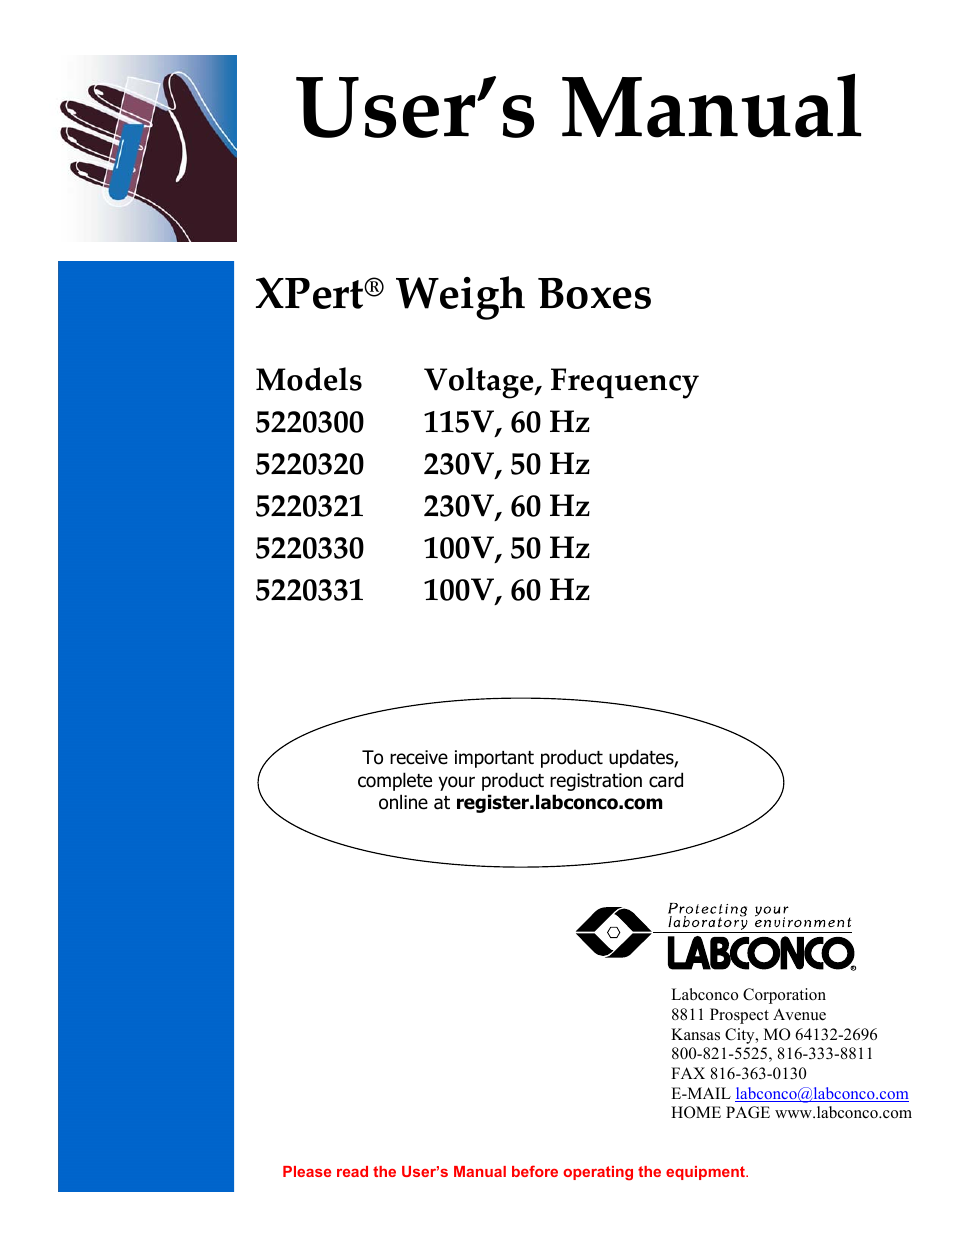 XPert Weigh Boxes 5220331